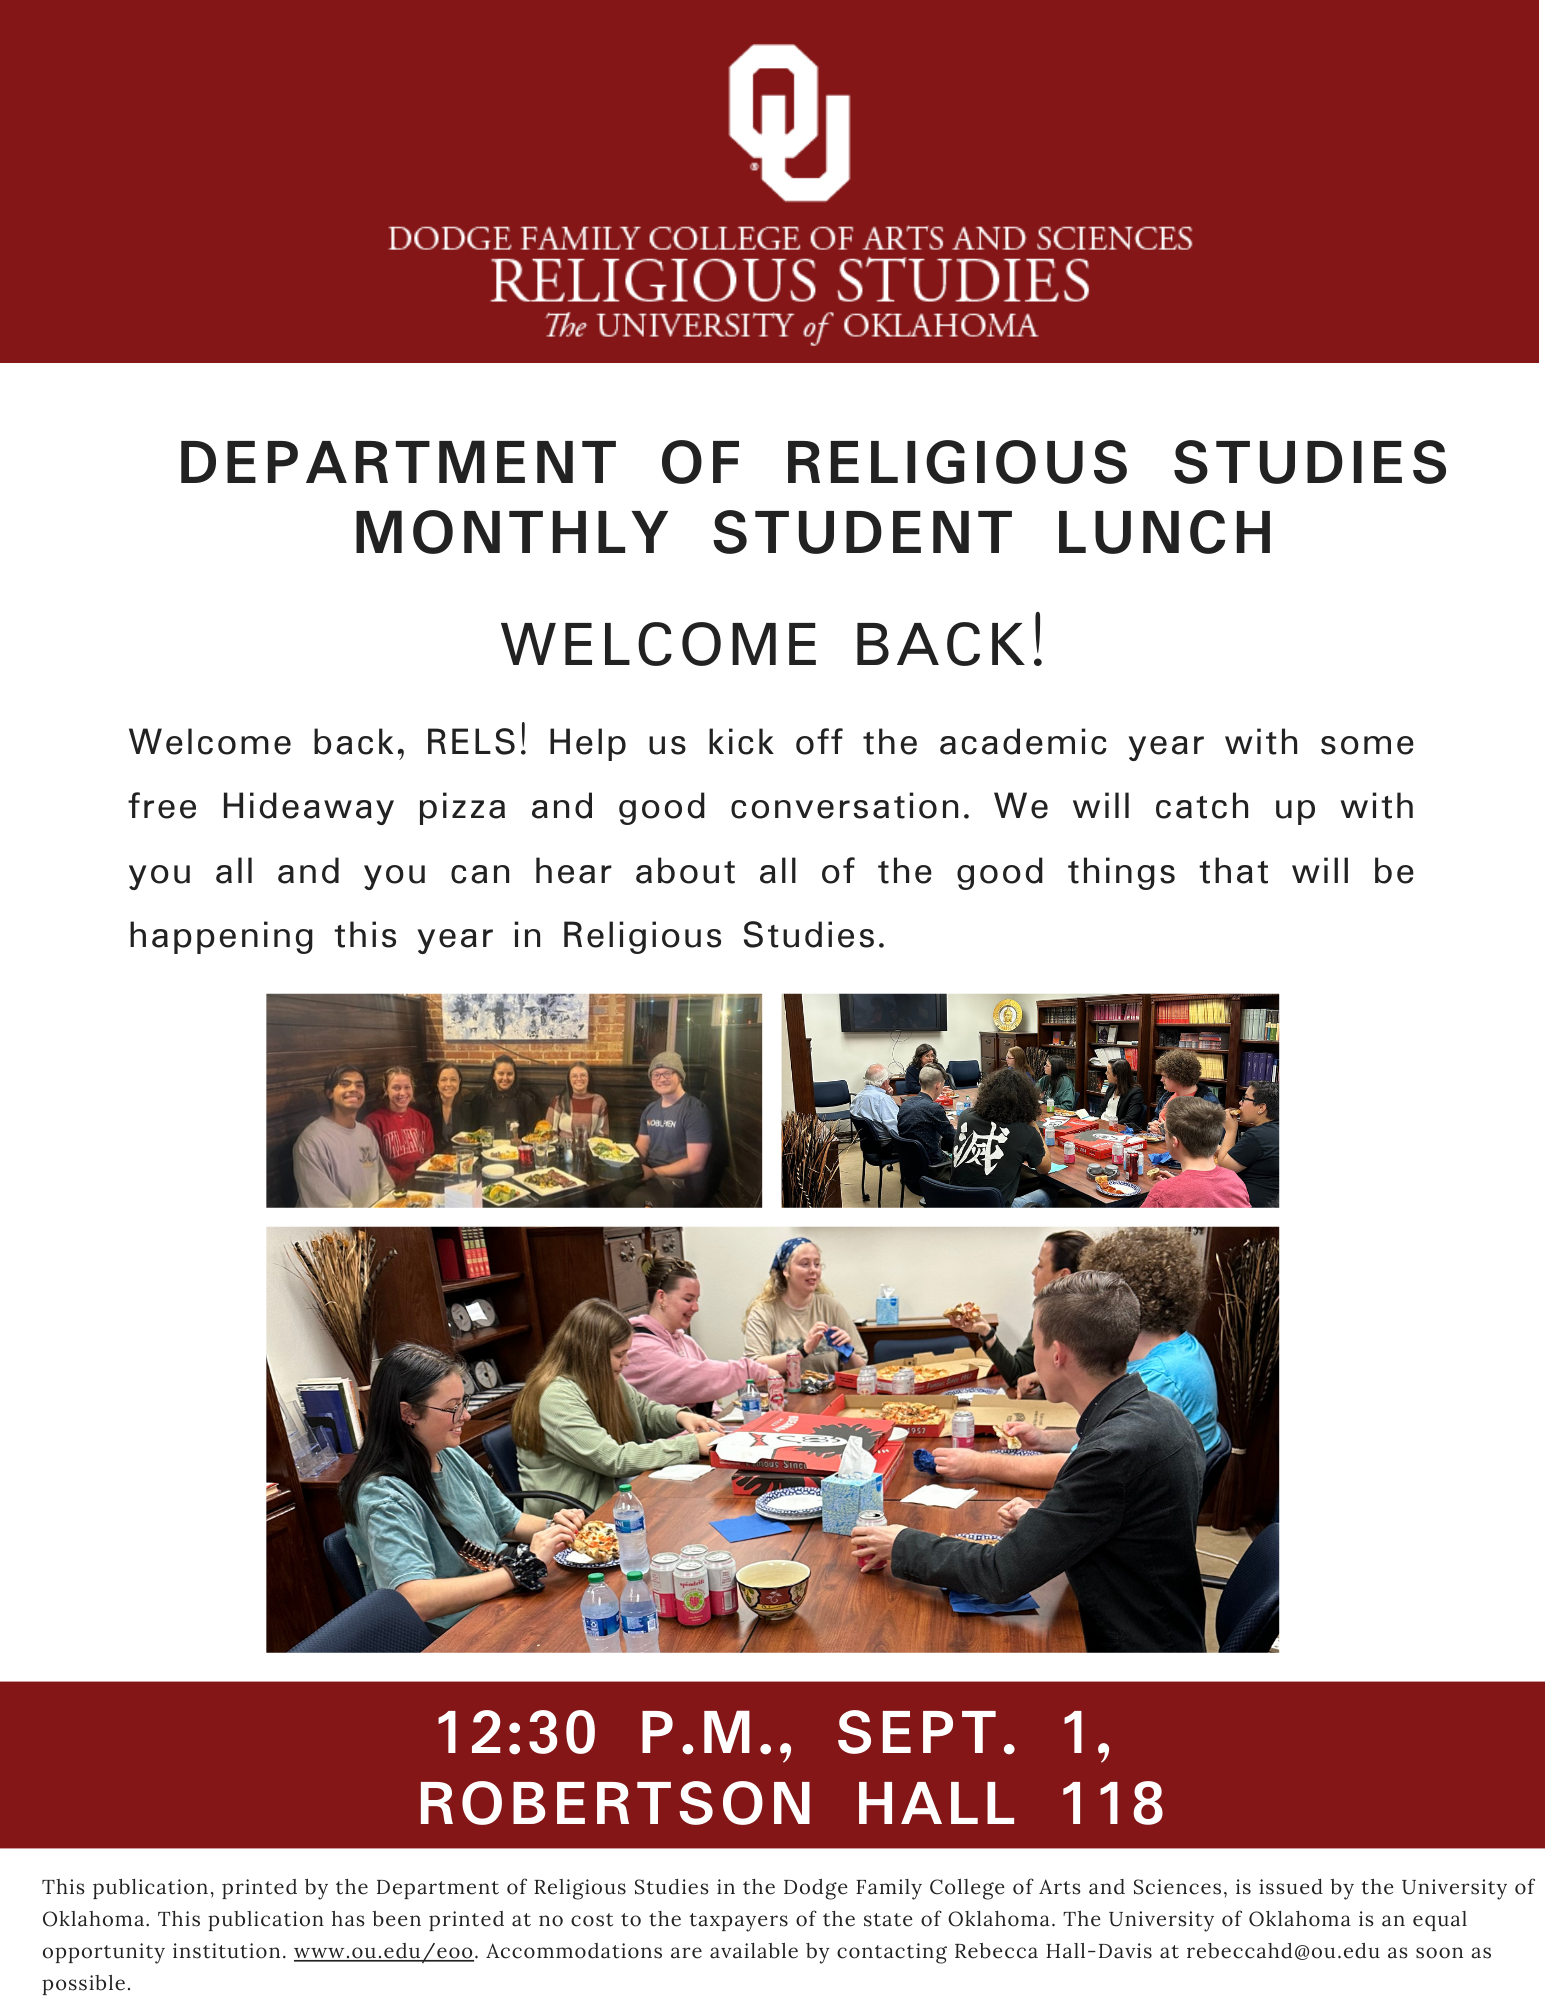 Welcome back, RELS! Help us kick off the academic year with some free Hideaway pizza and good conversation. We will catch up with you all and you can hear about all of the good things that will be happening this year in Religious Studies.  12:30 p.m. Friday, Sept. 1  Robertson Hall 118